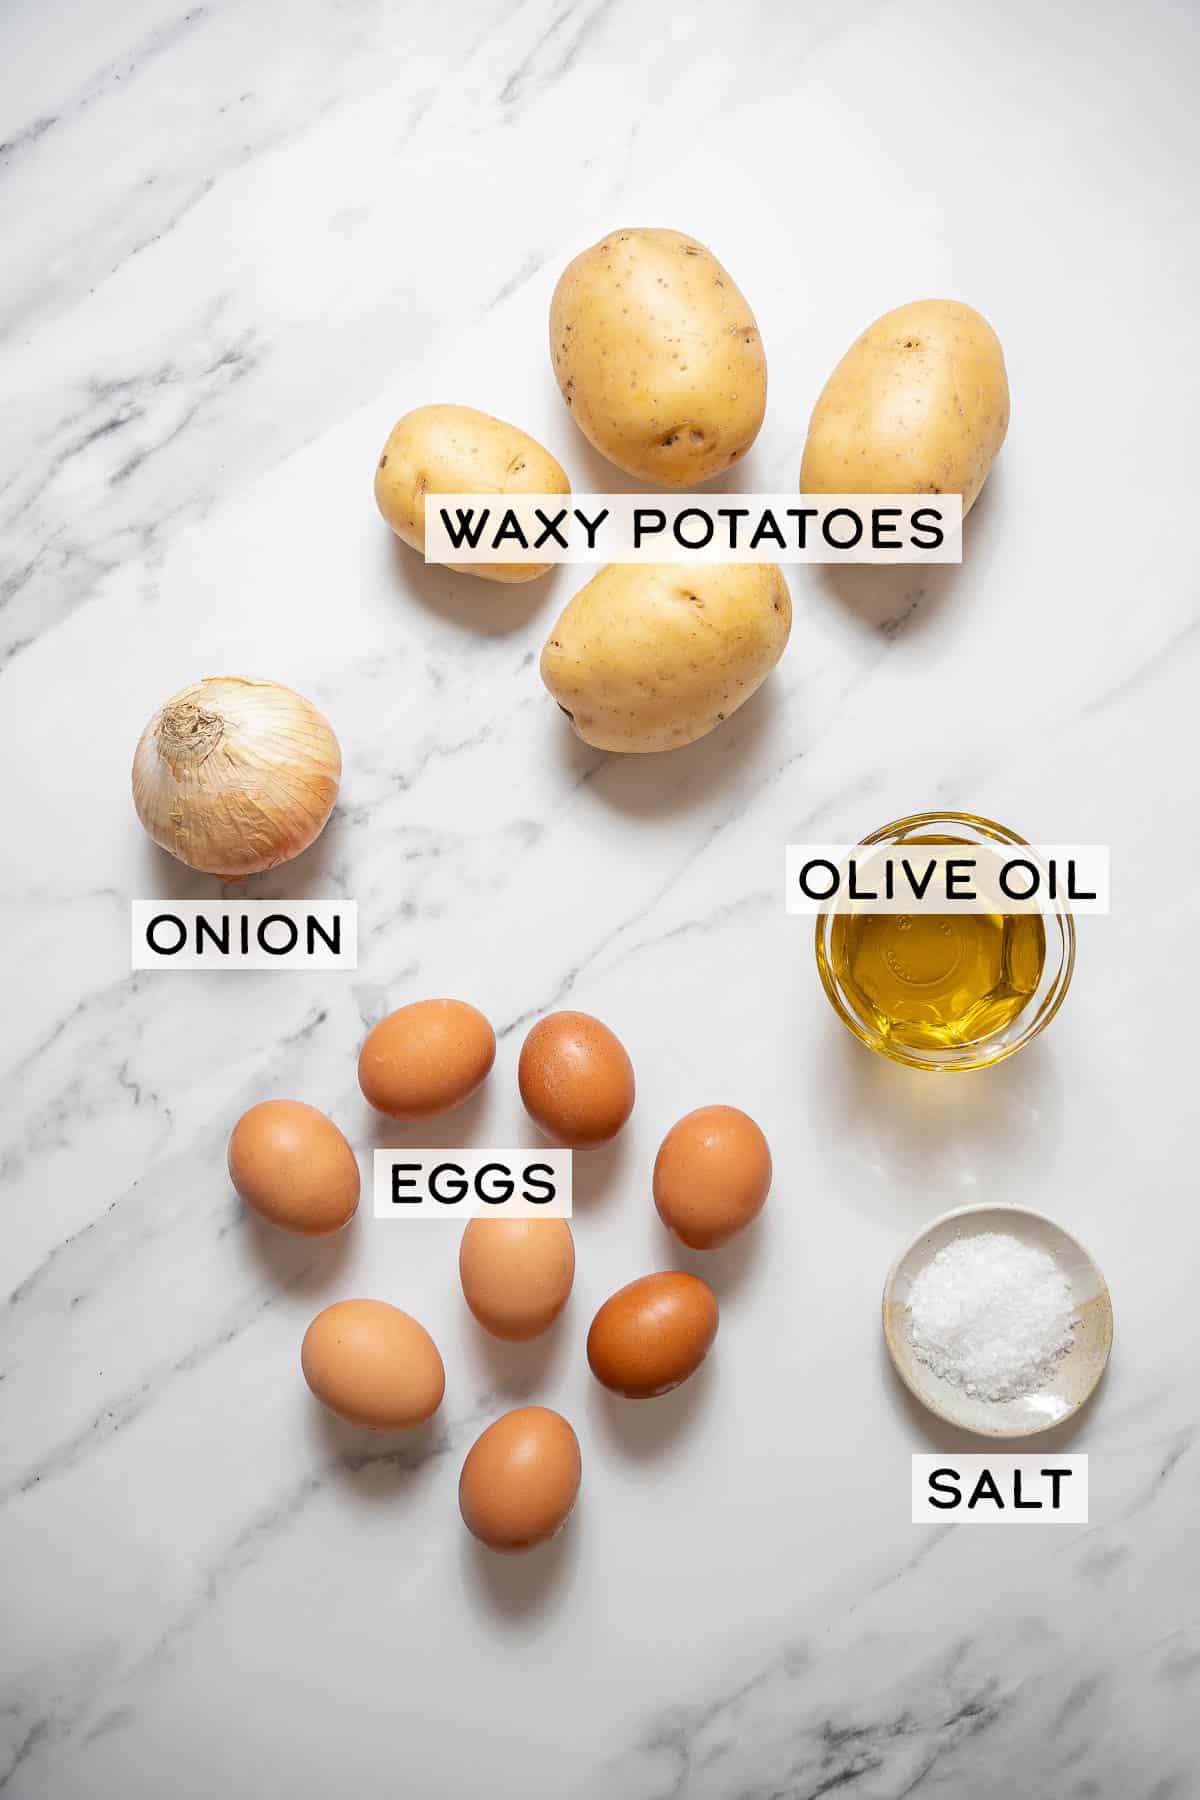 onion, potatoes, eggs, and bowls of oil and salt on a white marble surface.